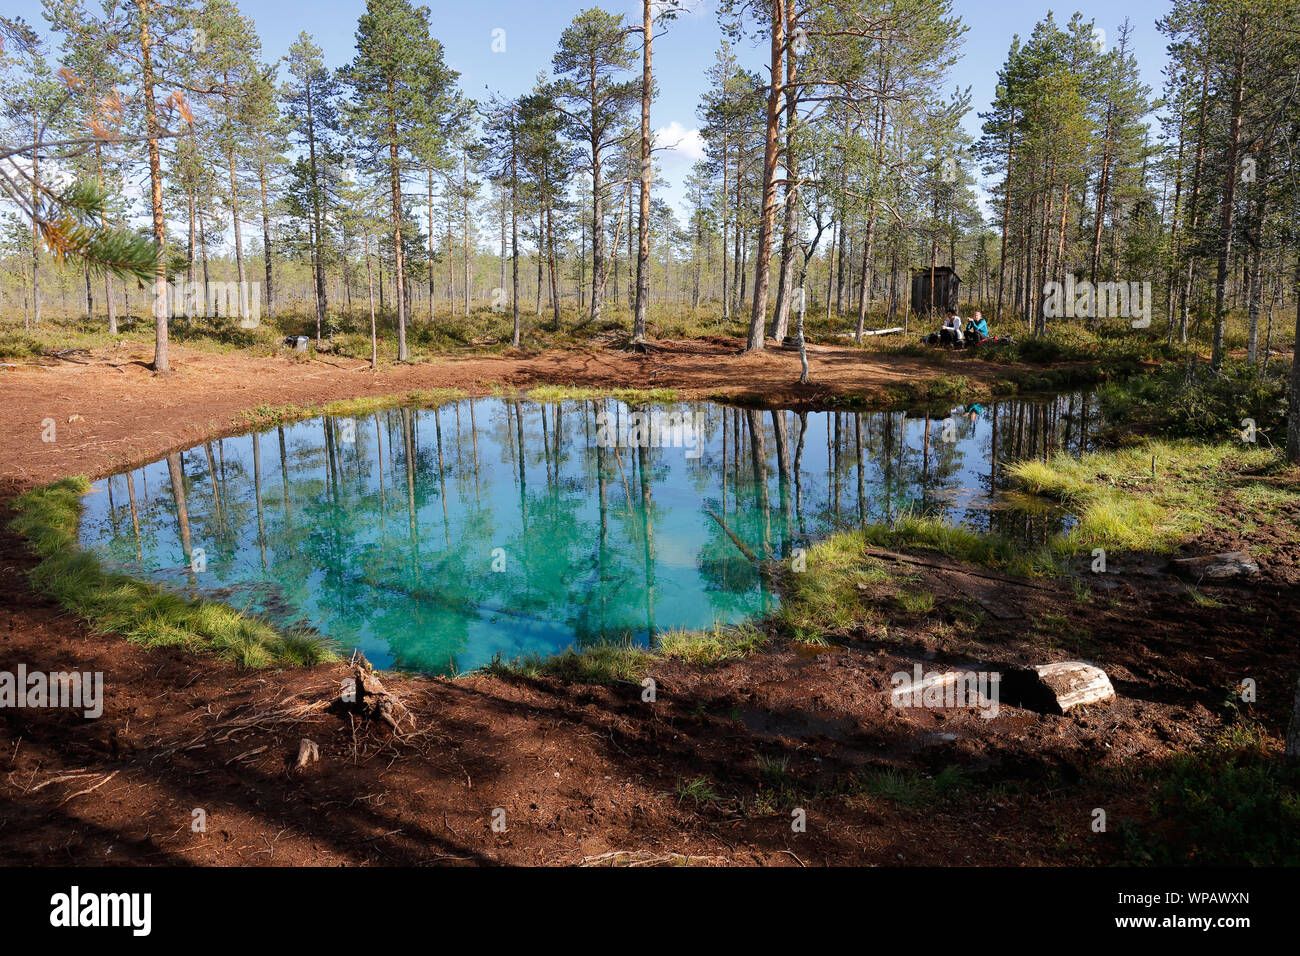 Arvidsjaur, Sweden - August 21, 2019: View of the Frog spring, Grodkallan in Swedish, with clear fresh water, located near Arvidsjaur in the Swedish p Stock Photo